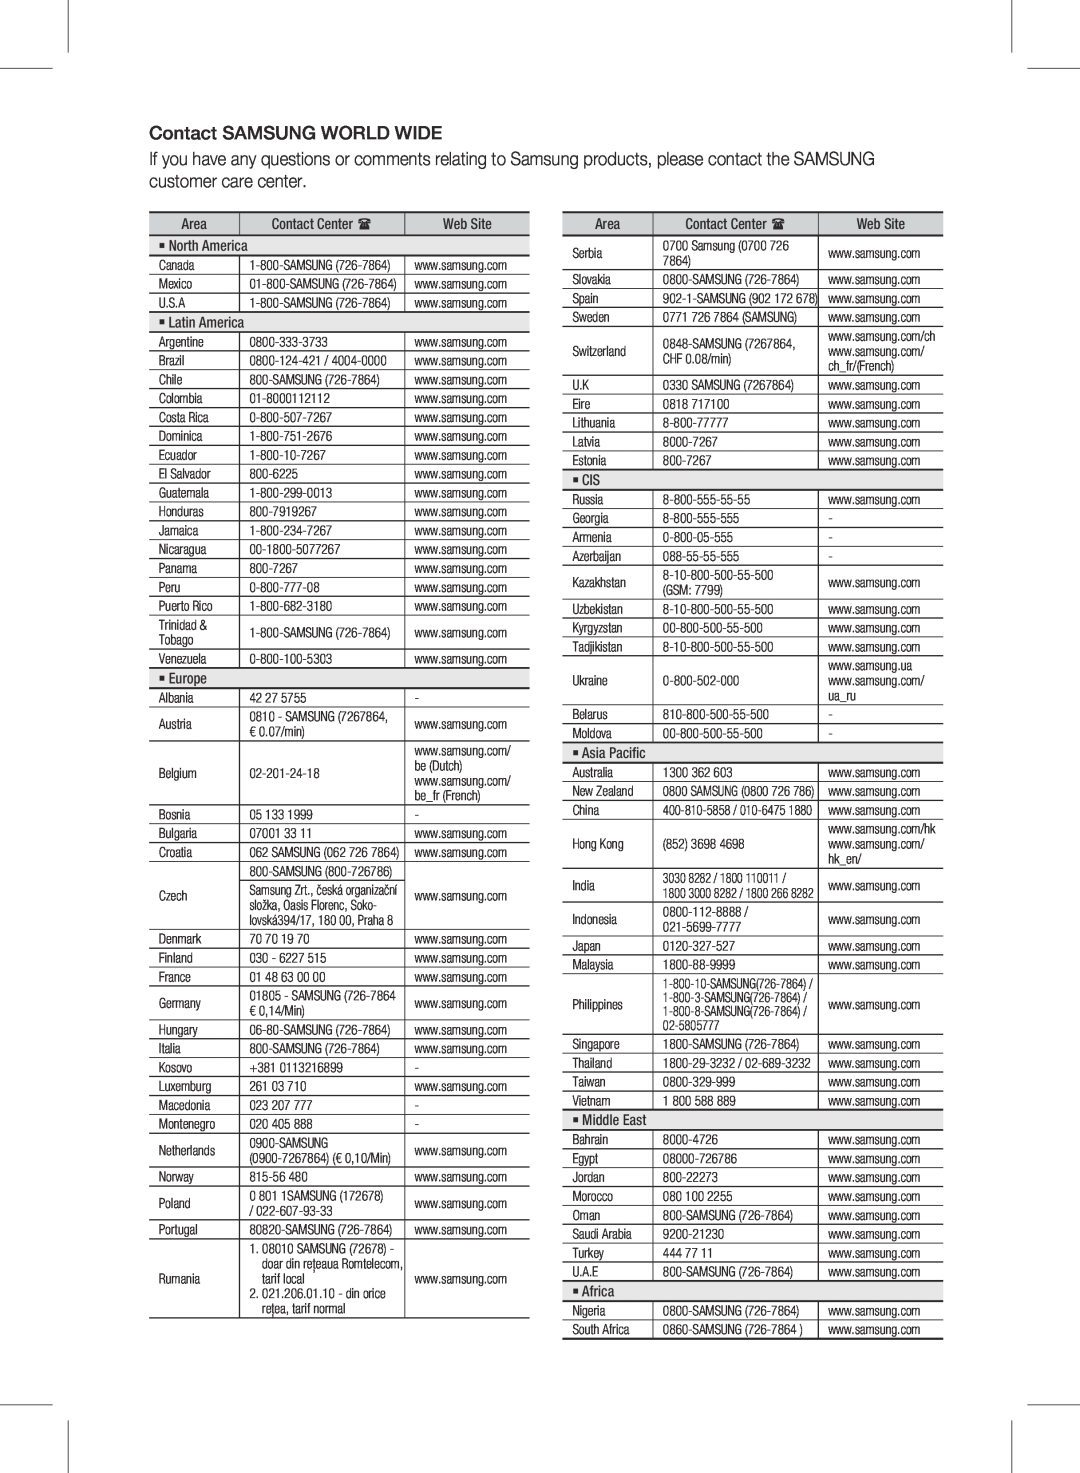 Samsung HW-D451, HW-D450 user manual Contact SAMSUNG WORLD WIDE, Area, Contact Center , Web Site, ` Europe, ` Cis, ` Africa 